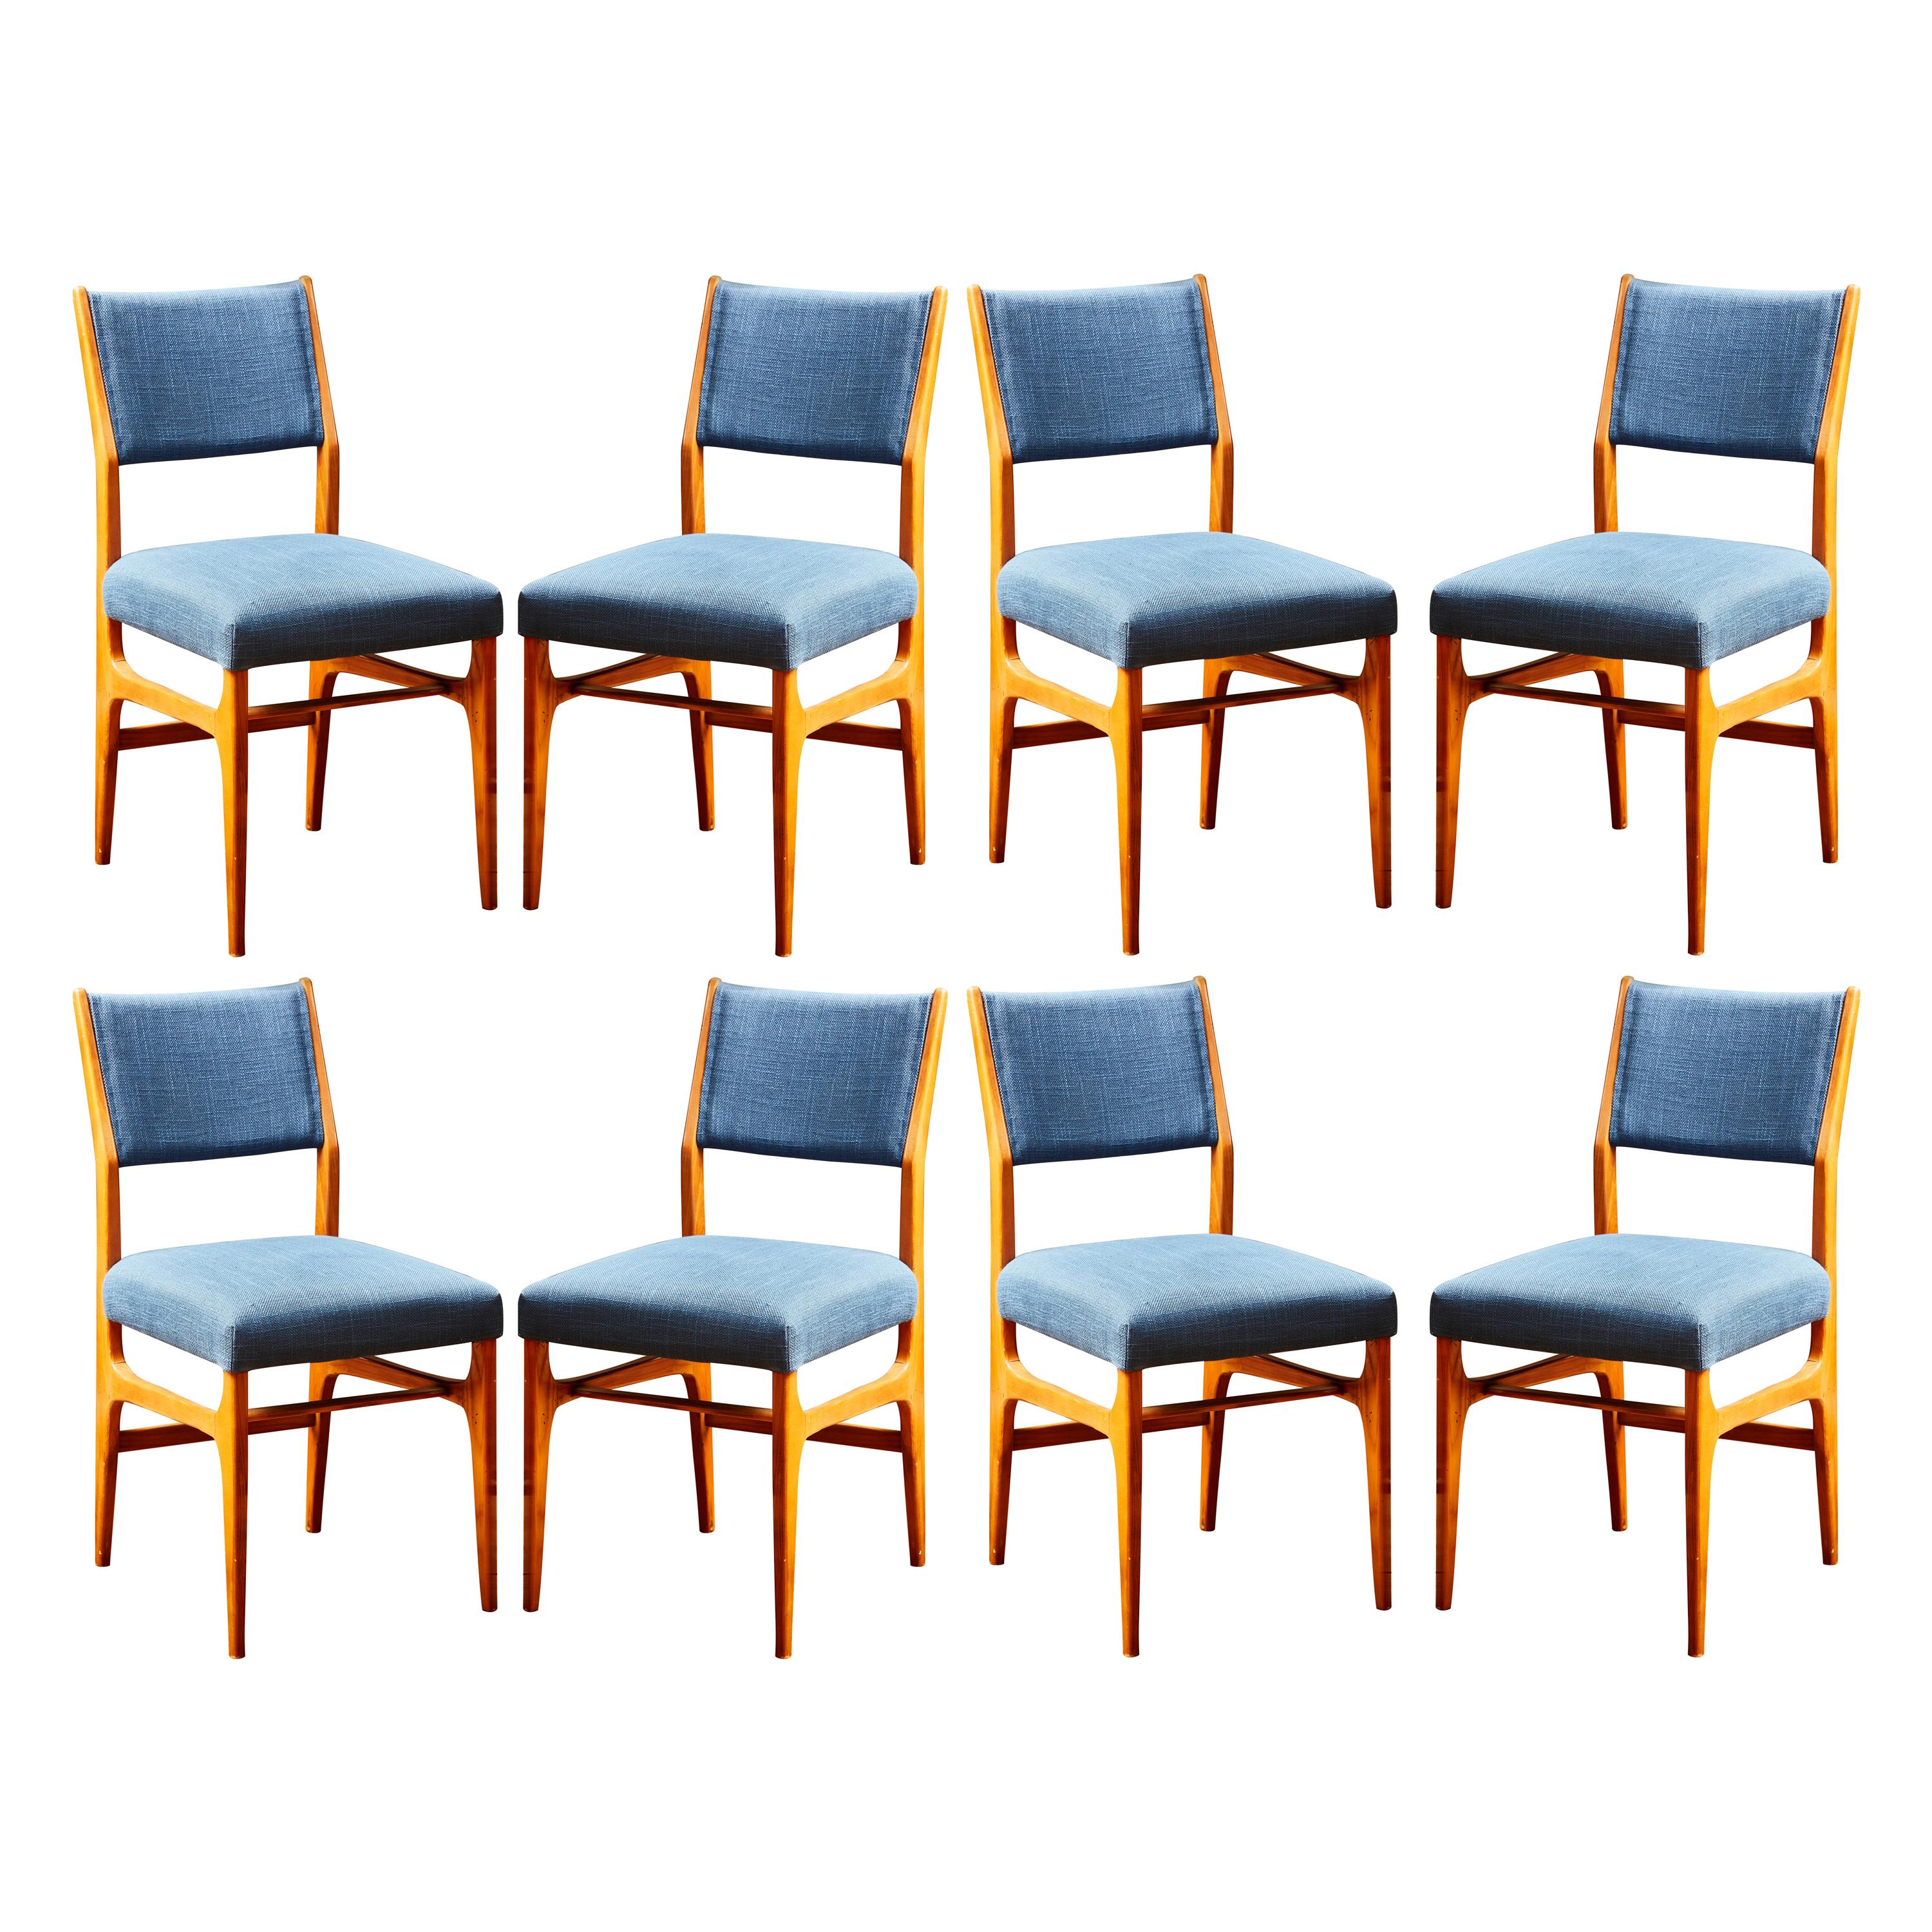 Set of 8 Gio Ponti Vintage Chairs, made by Cassina, Italy, circa 1951